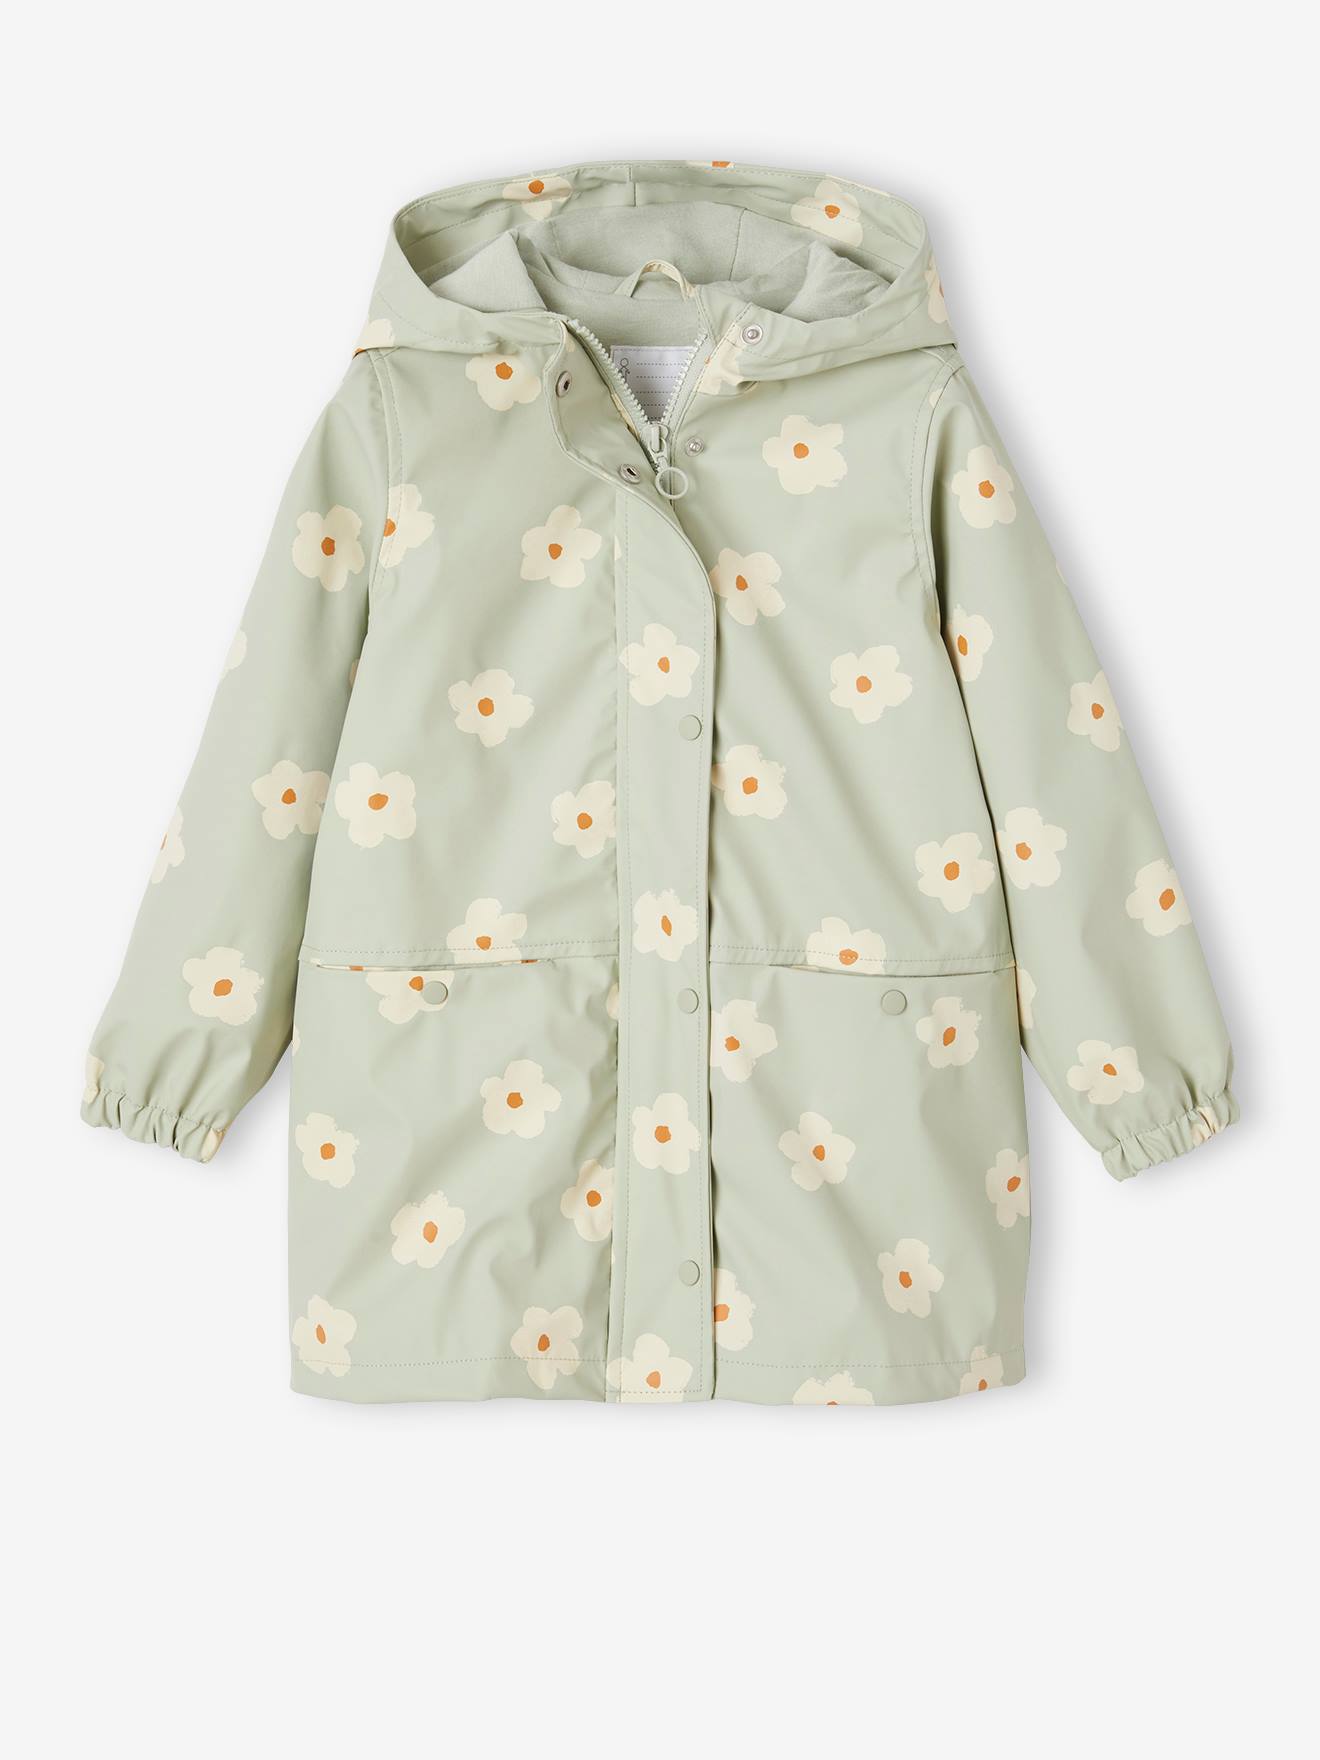 Floral Raincoat with Hood, for Girls - sage green